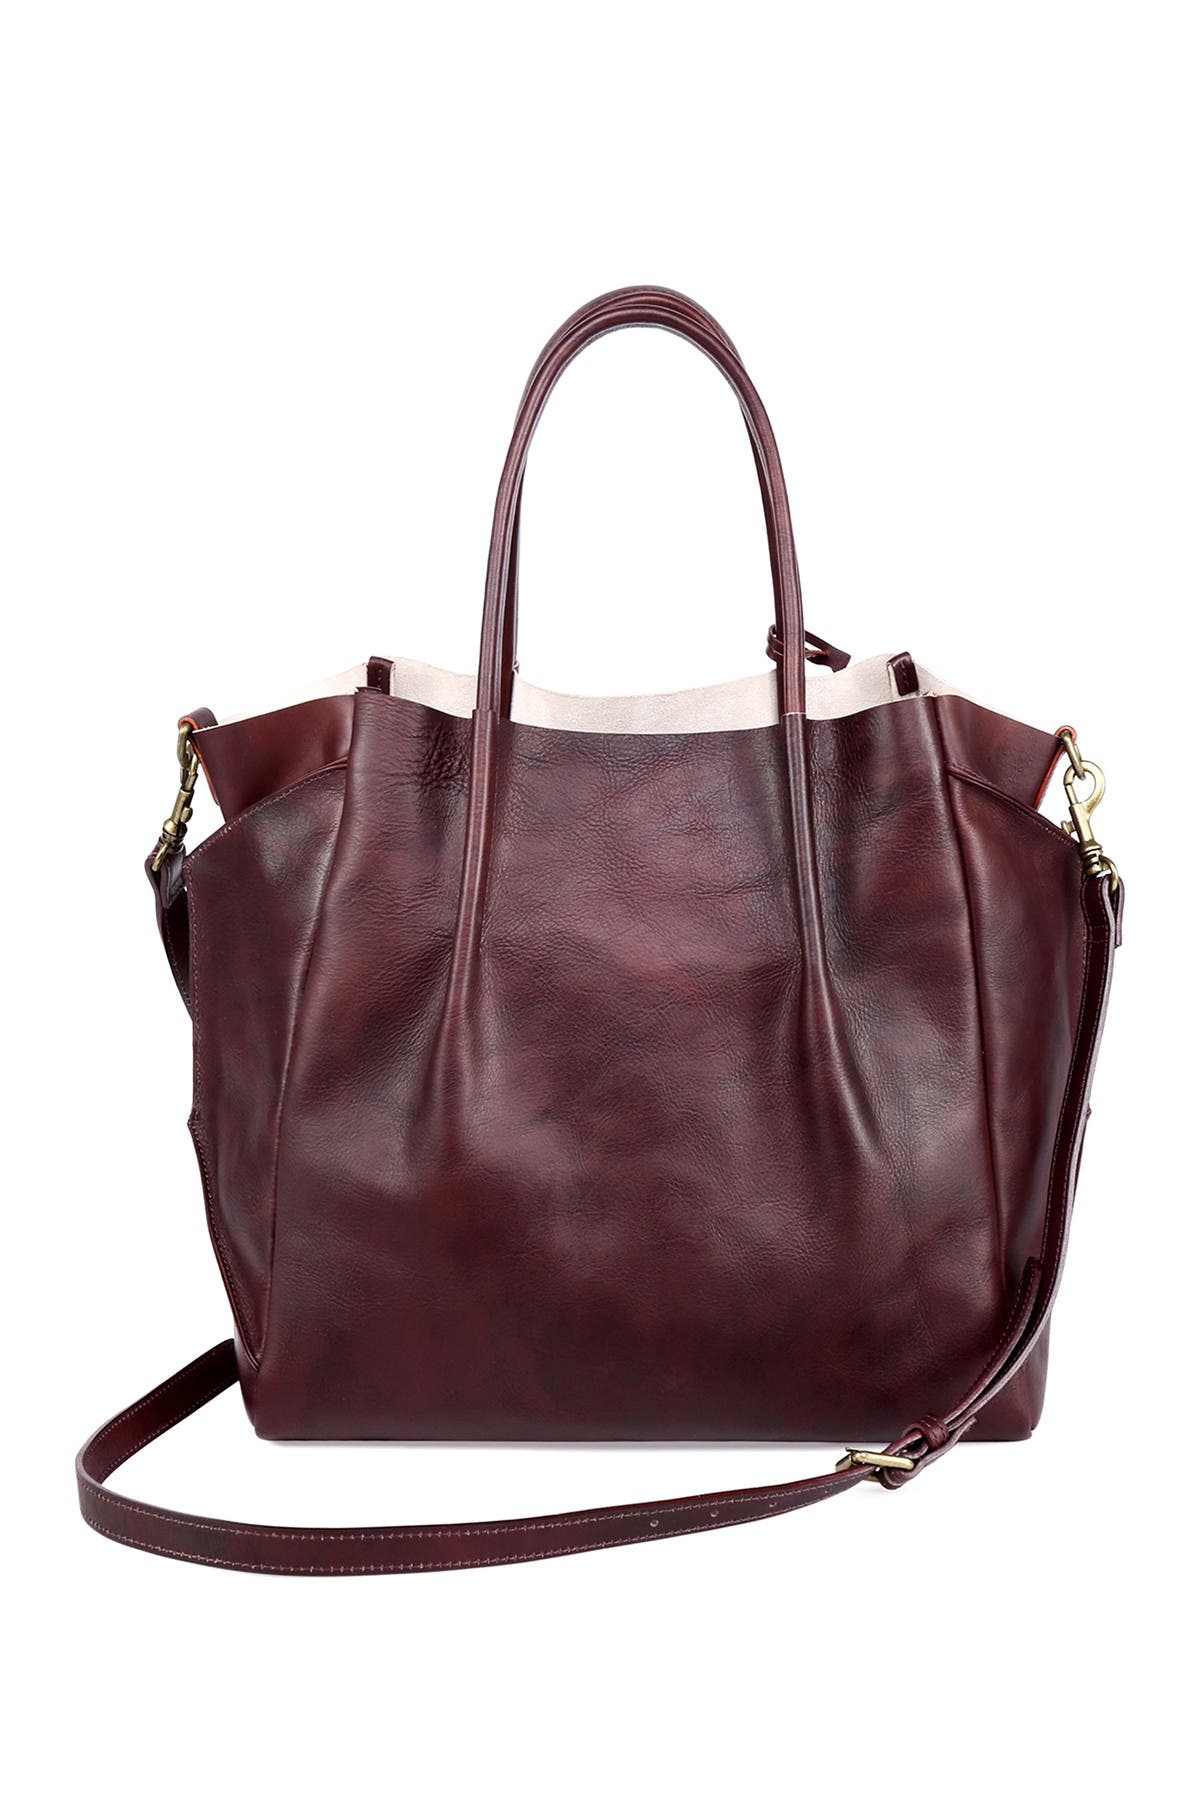 Old Trend | Sprout Land Leather Tote Bag | Nordstrom Rack